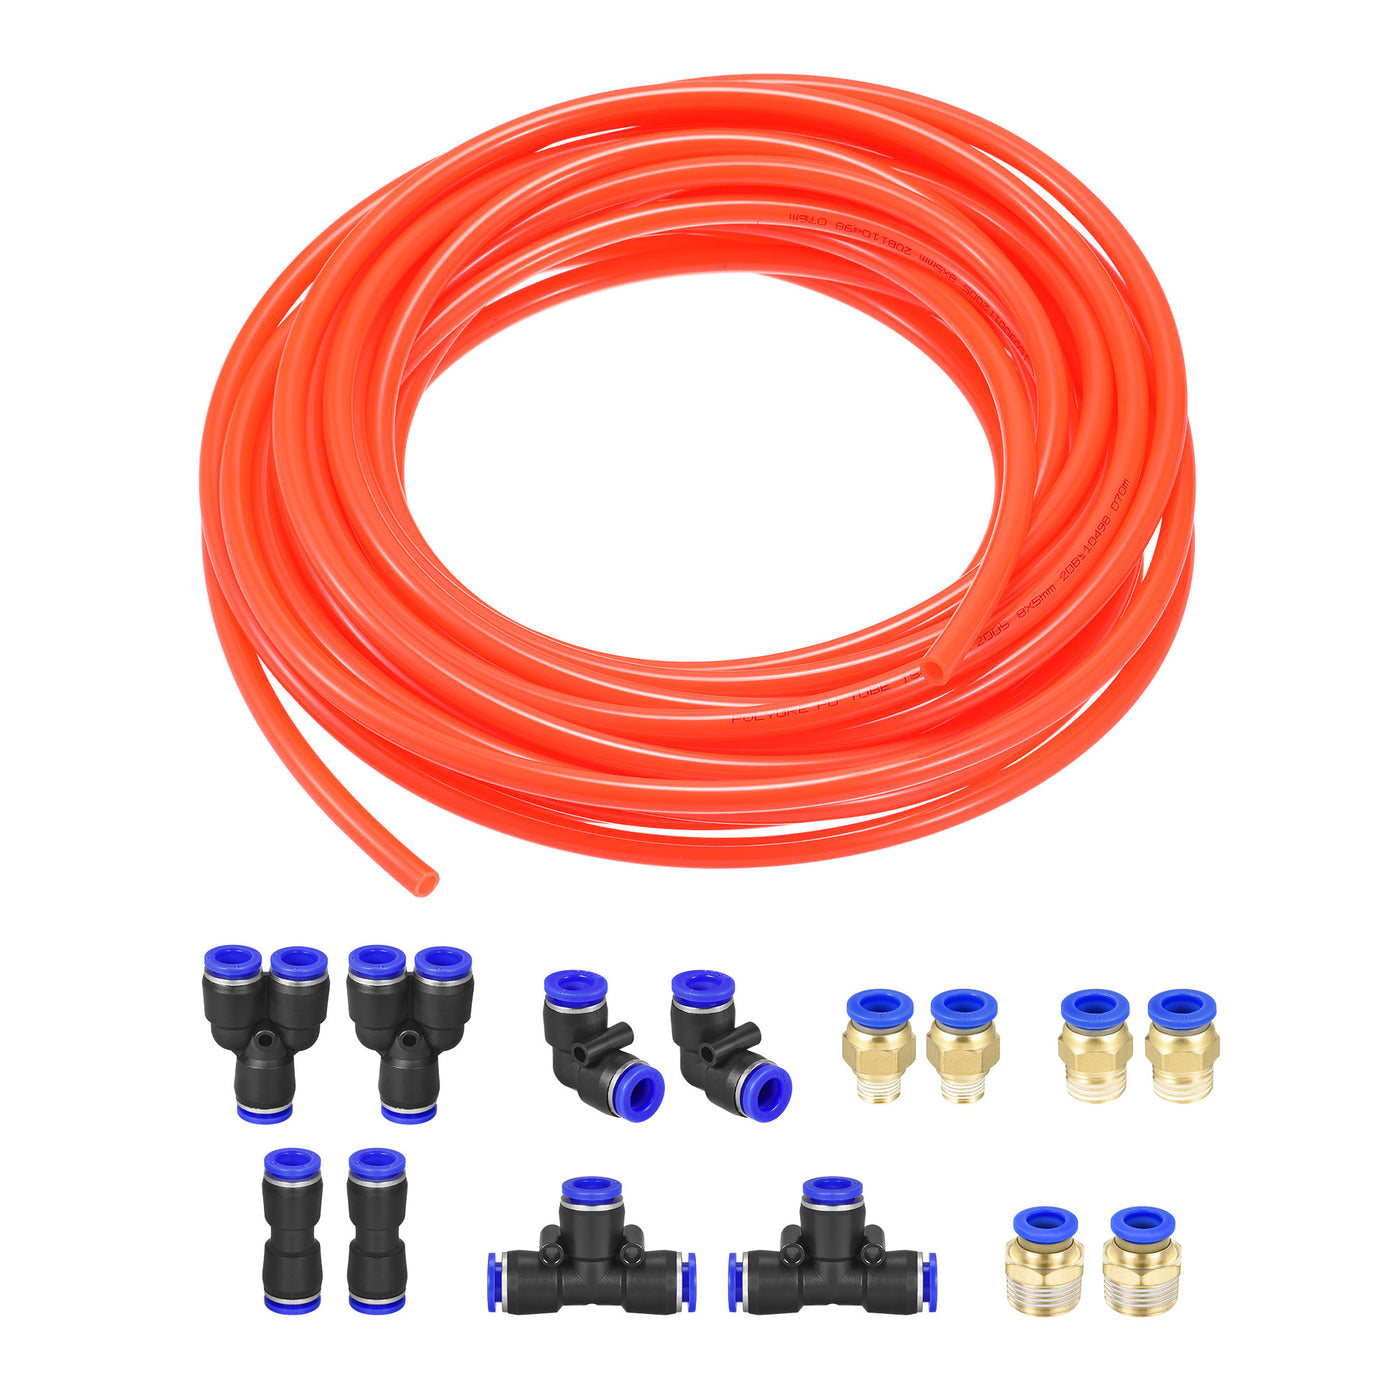 uxcell Uxcell Pneumatic Air Hose Tubing PU Air Compressor Tube 5mm/0.2''ID x 8mm/0.3''OD x 10m/32.8Ft Polyurethane Pipe Bright Orange with 7 Type Connect Fittings